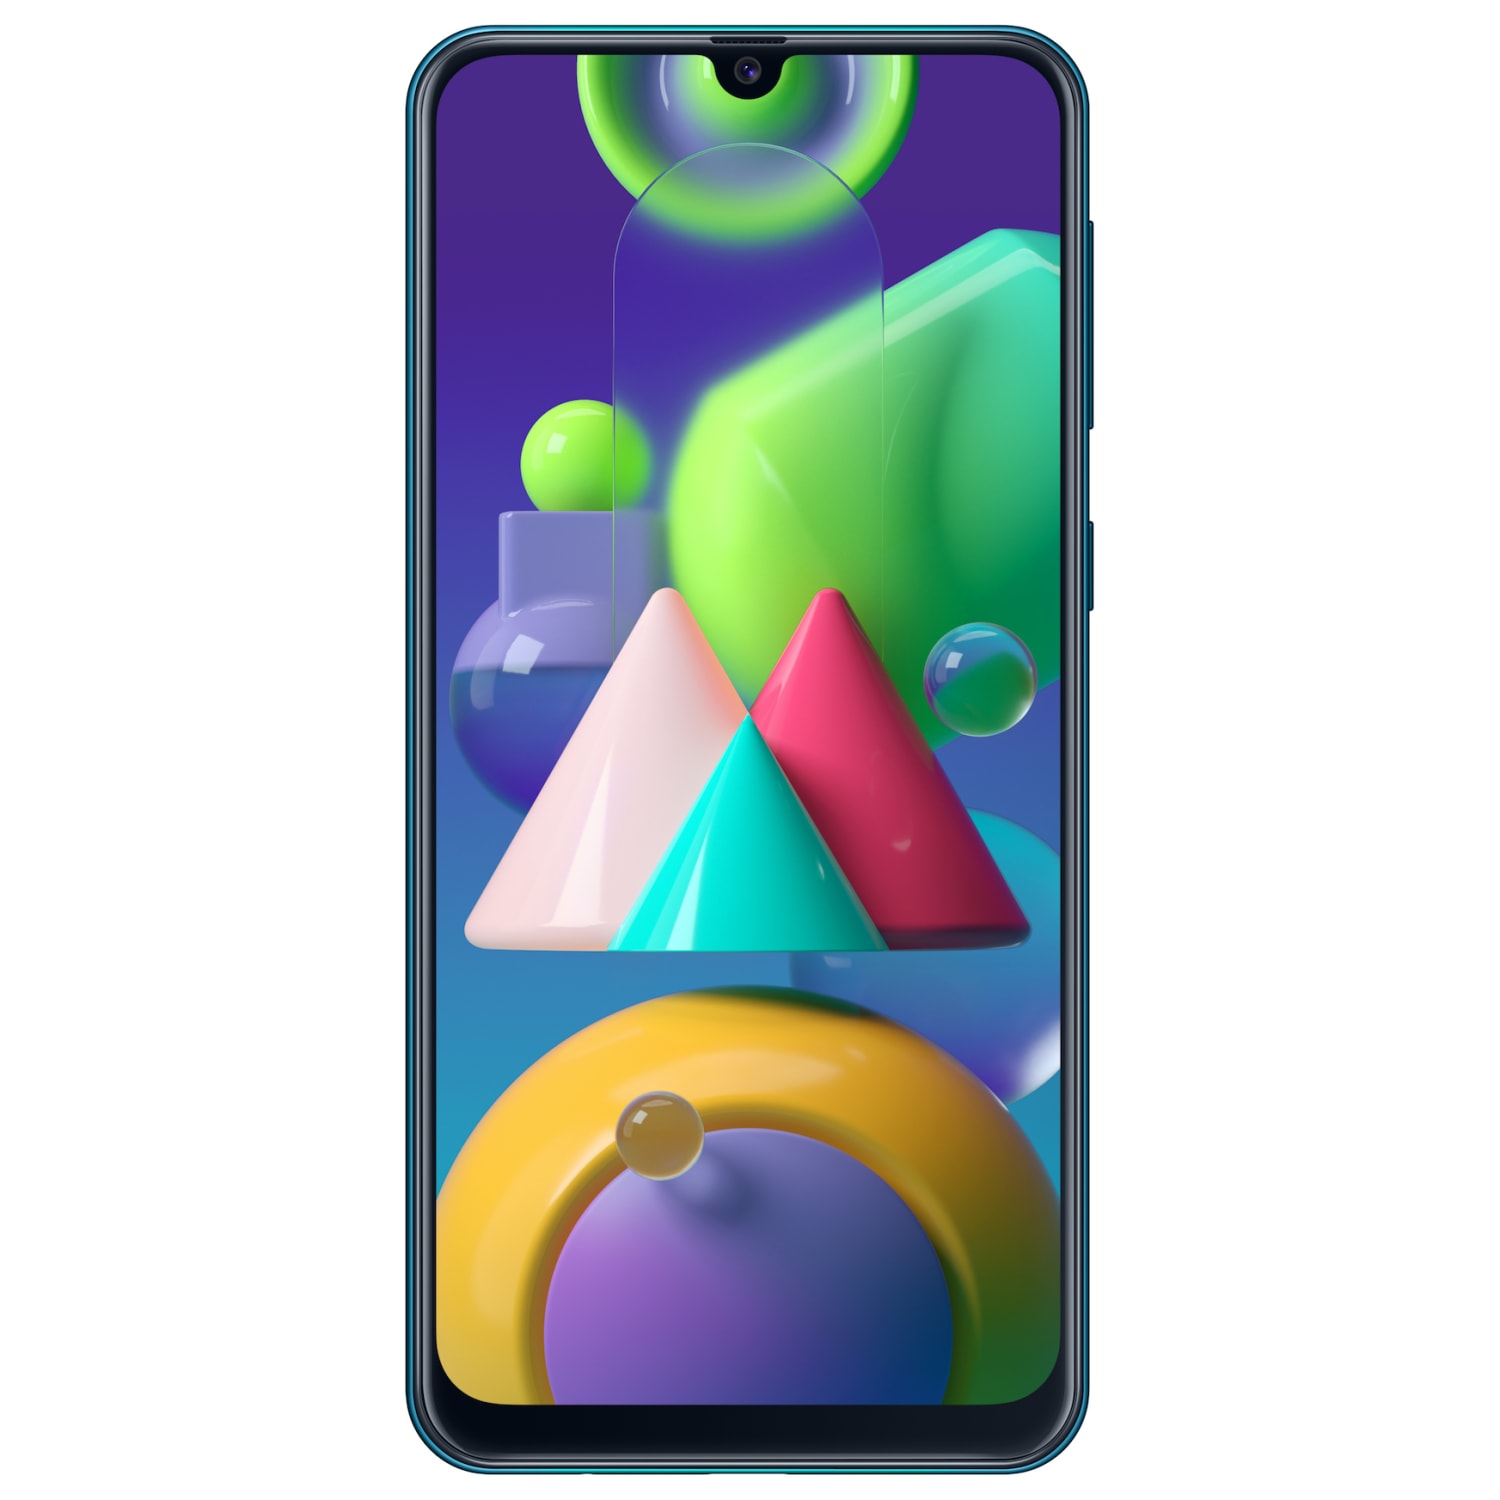 Samsung Galaxy M21 Price Specifications - Mobile Phone Price Online